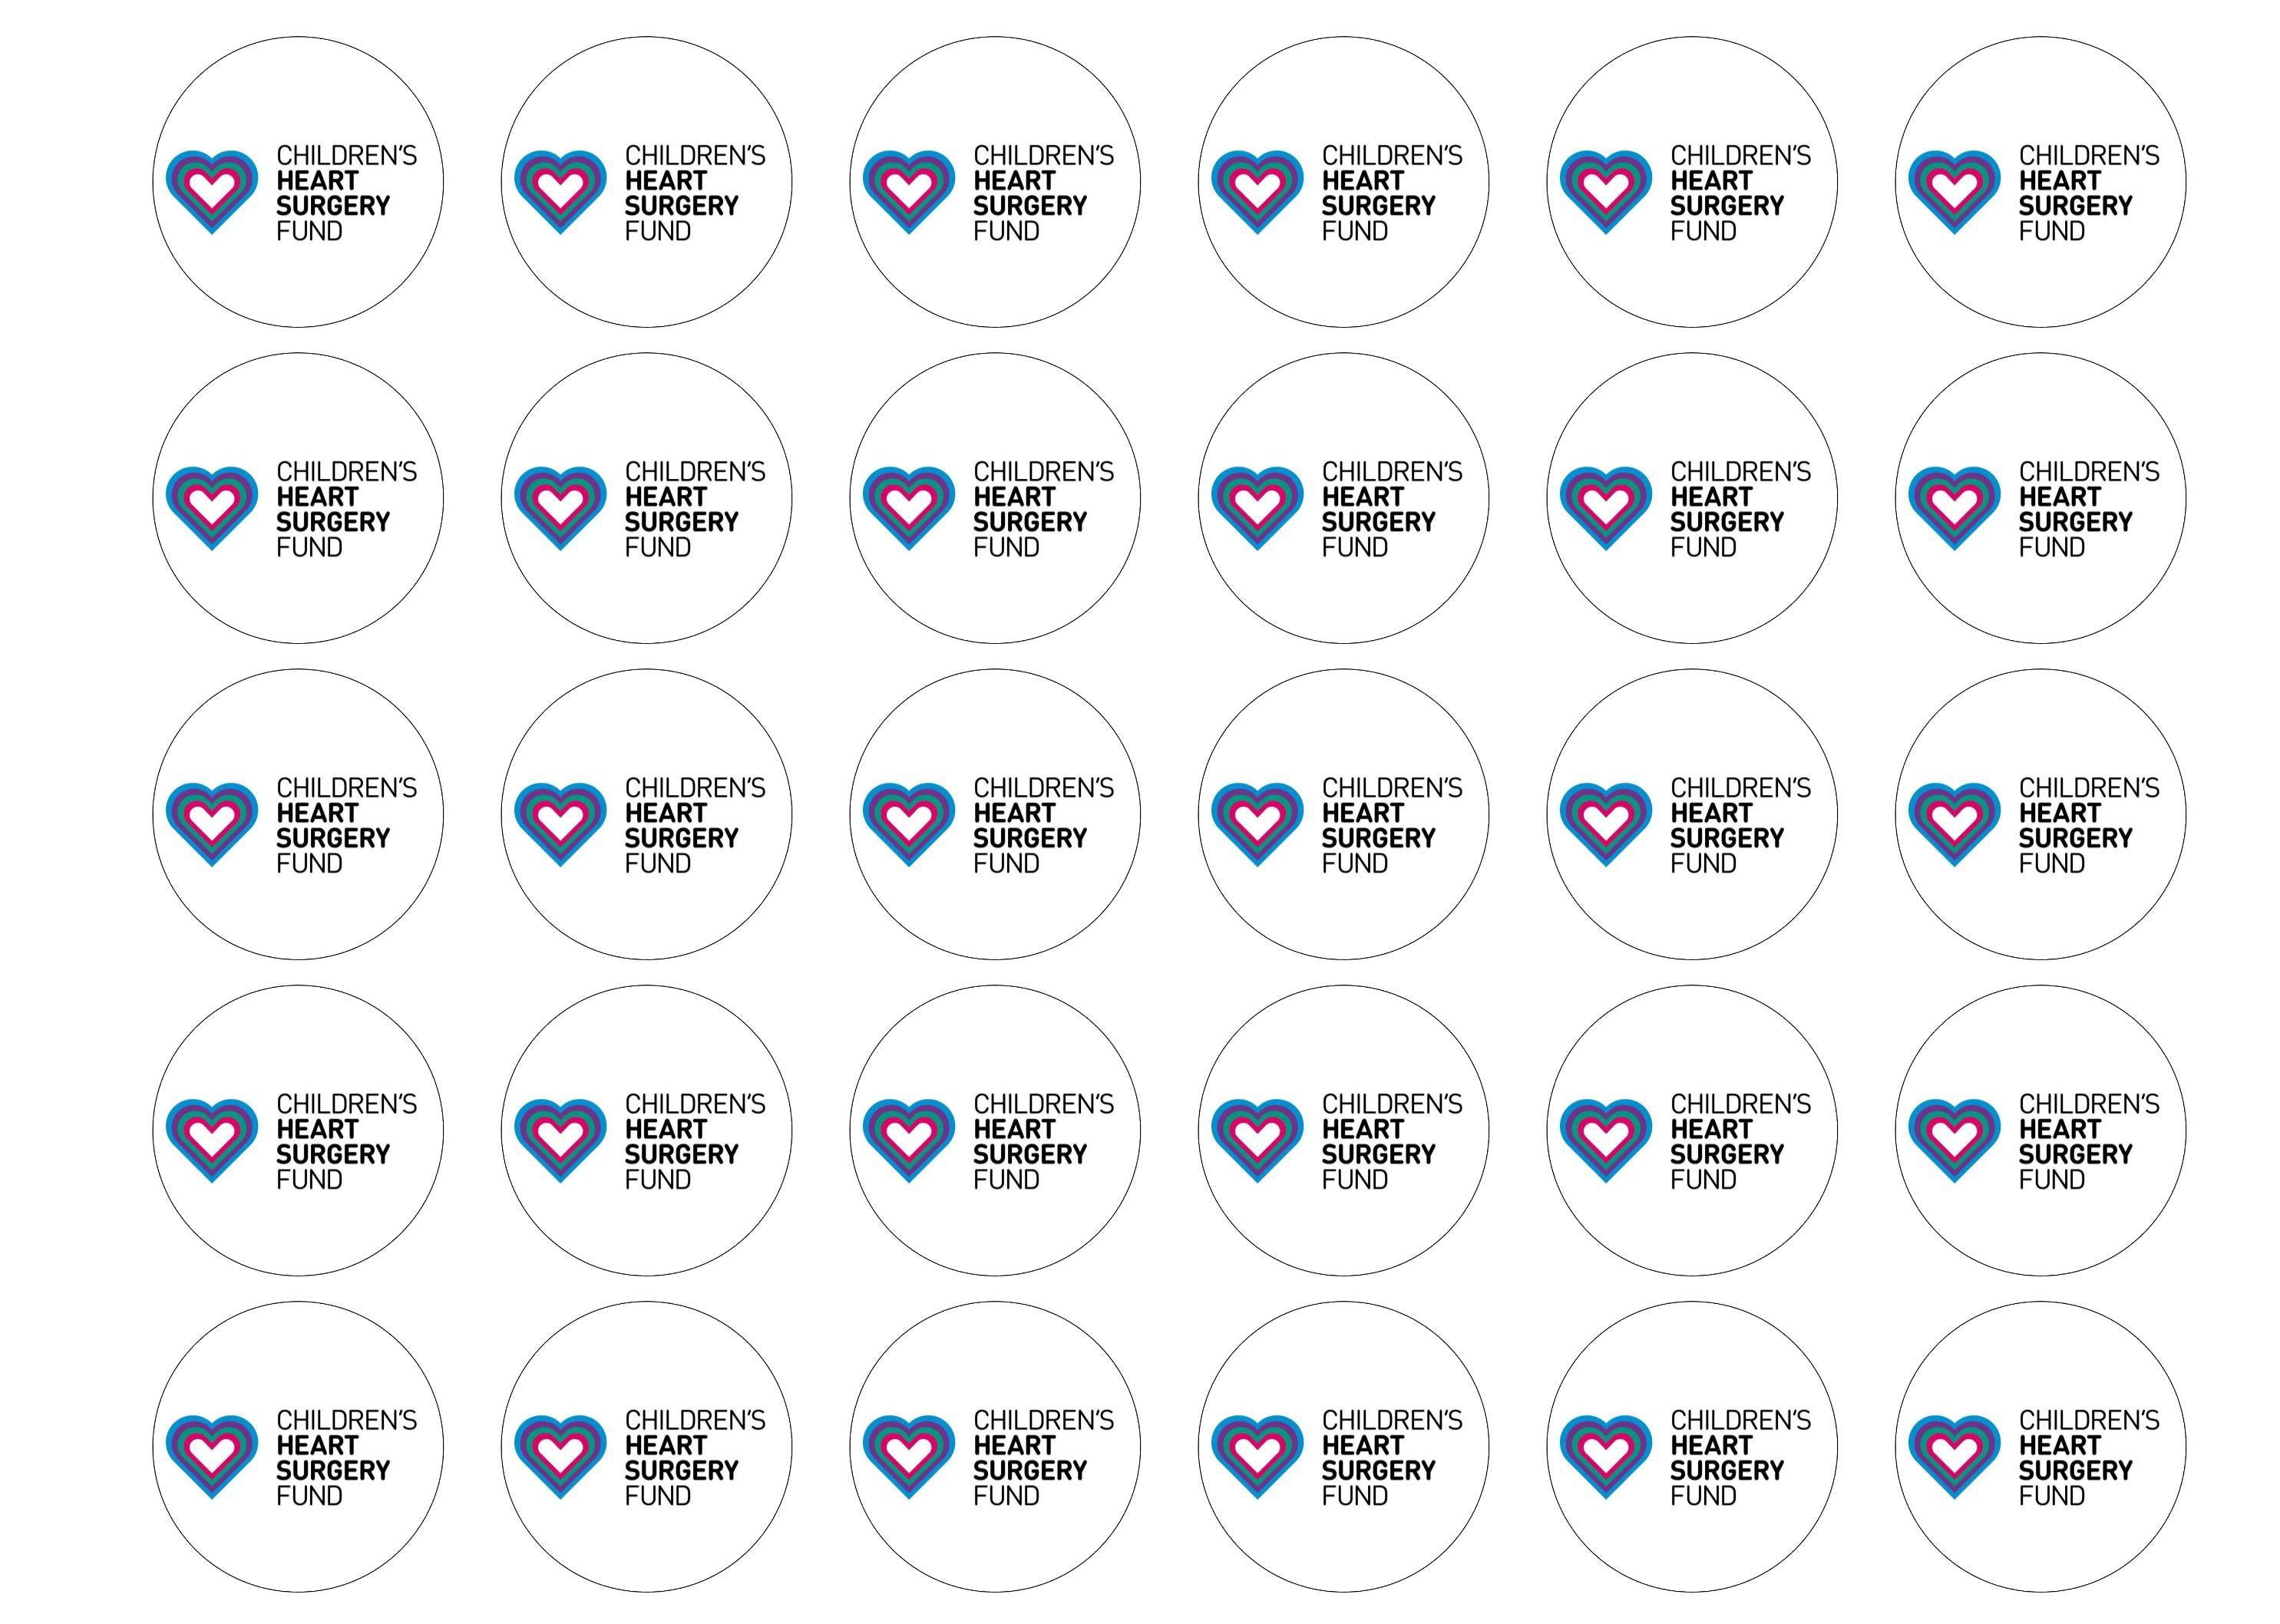 30 edible cupcake toppers supporting the Children's Heart Surgery Trust